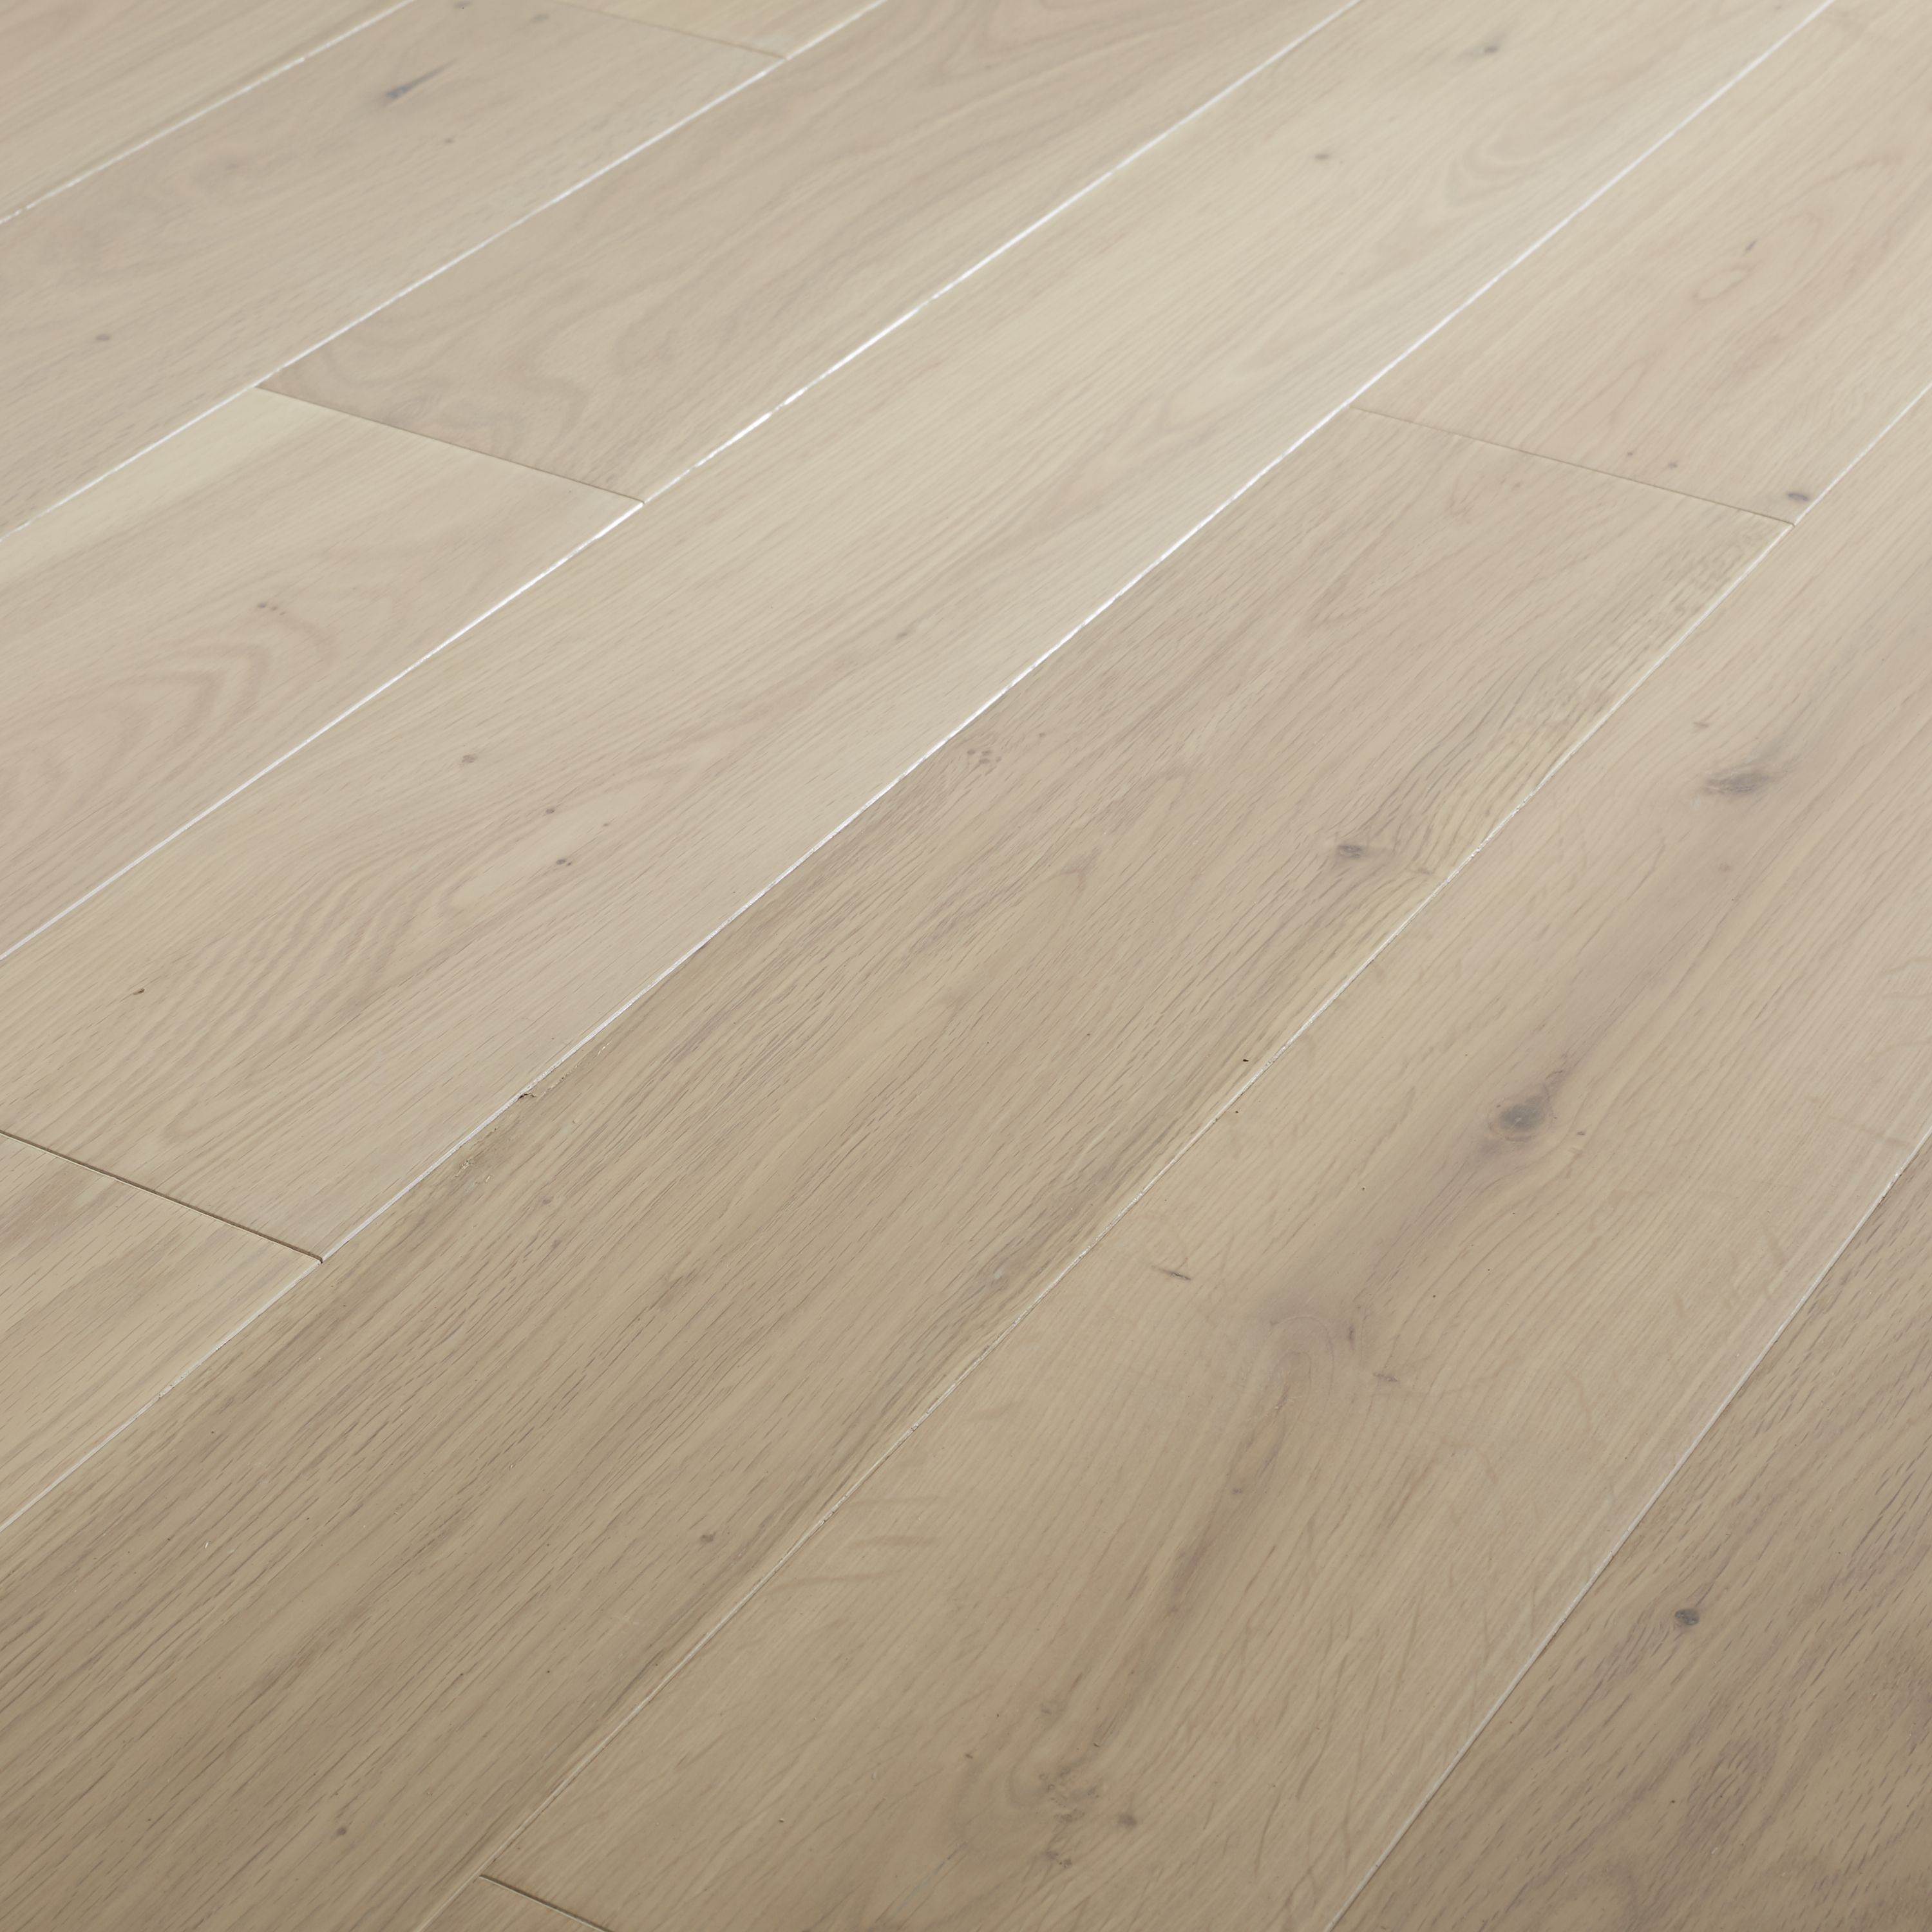 GoodHome Hotham Natural Oak Engineered Real wood top layer flooring, 1.35m² Pack of 1